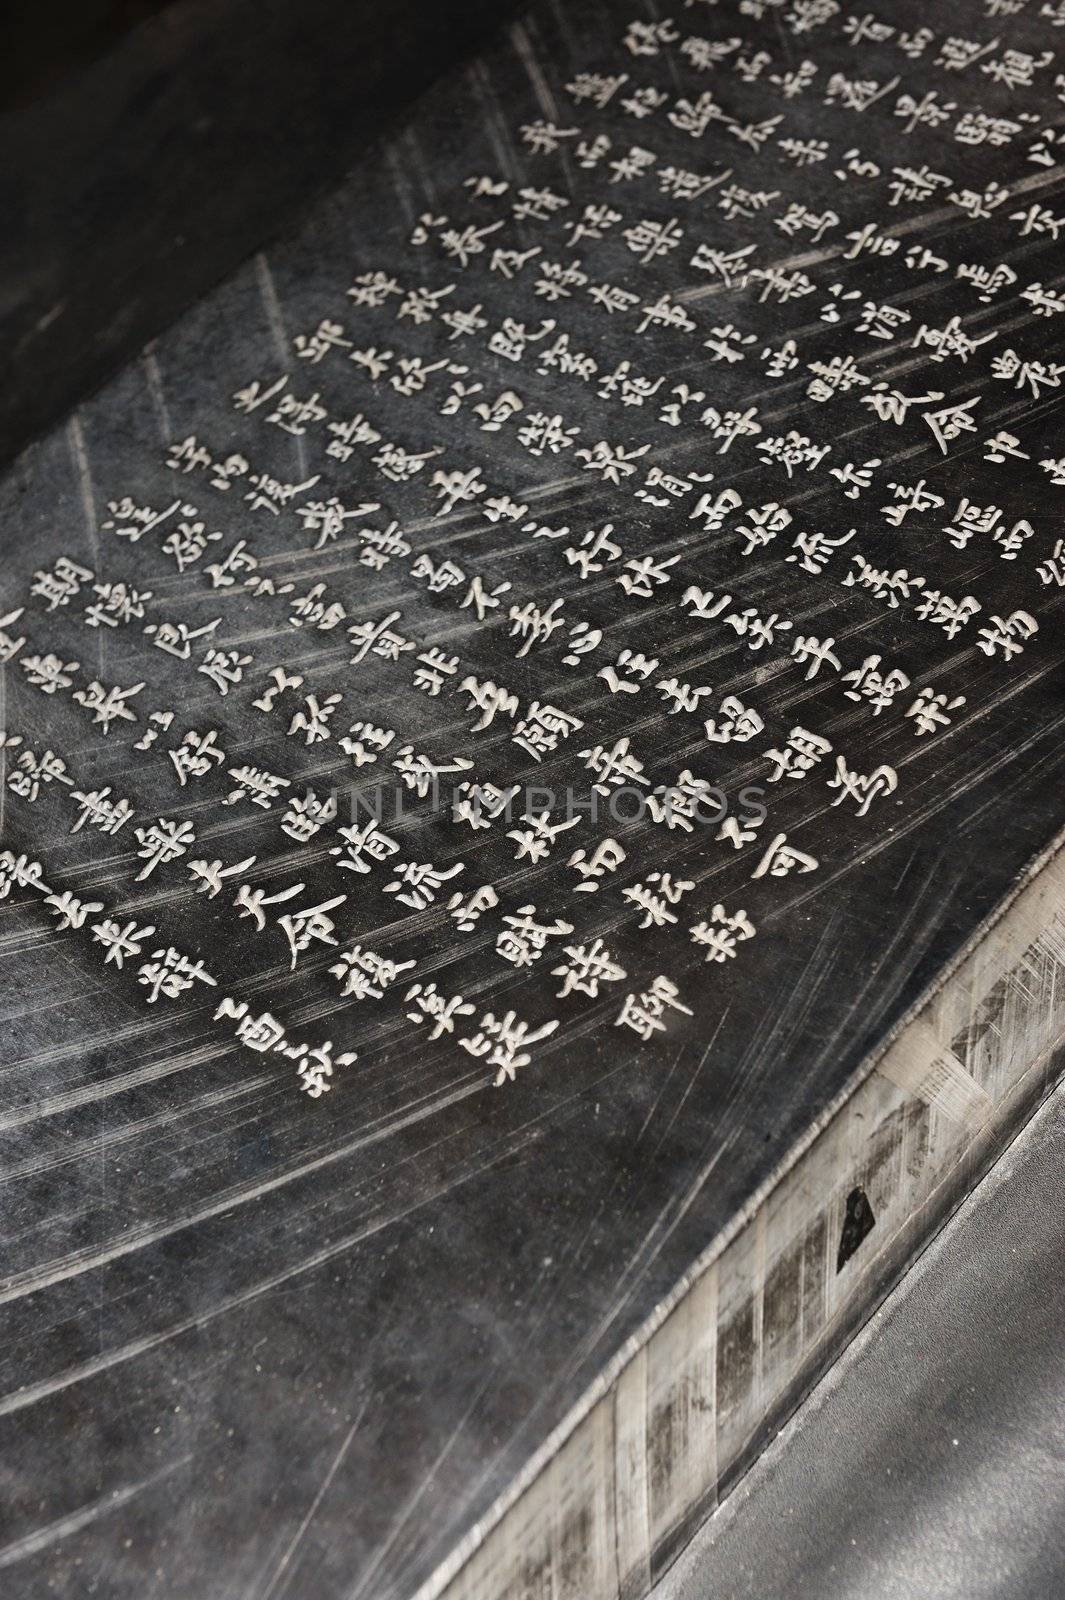 Chinese stone inscriptions by raywoo